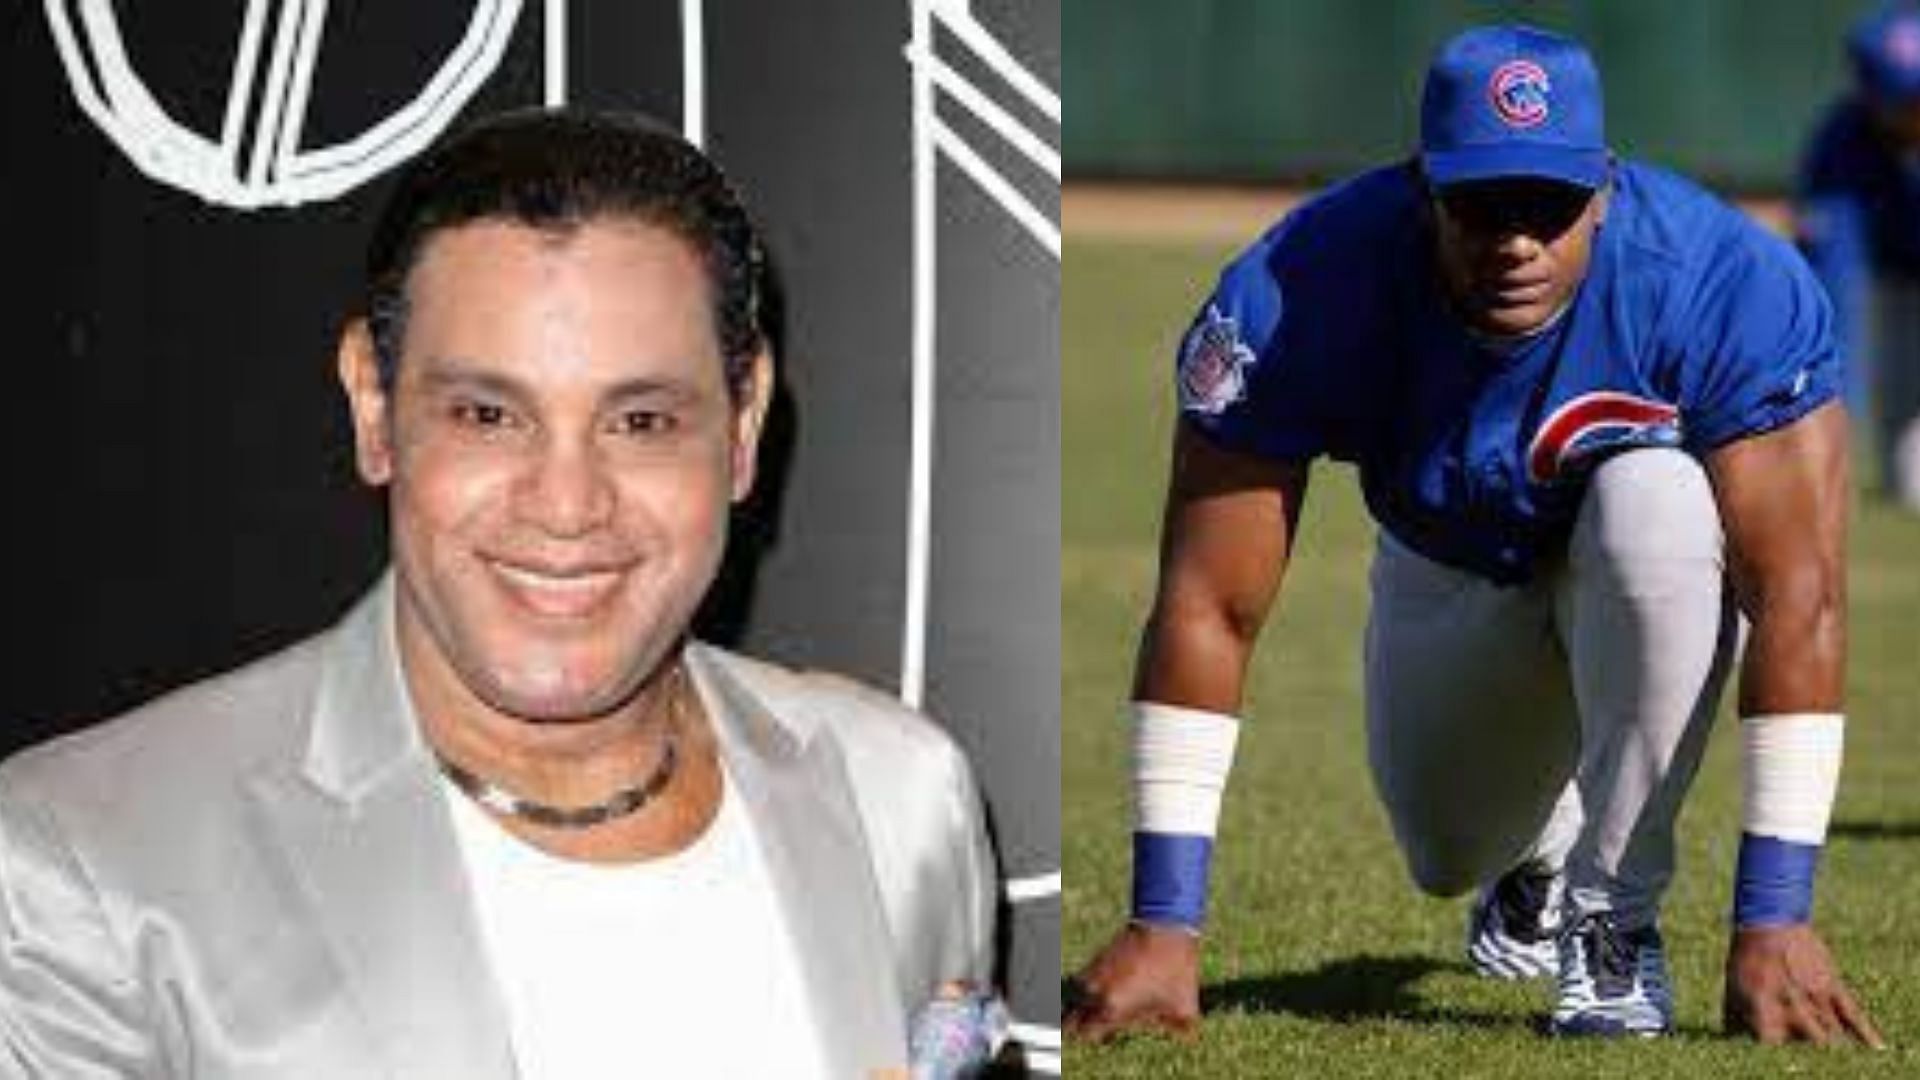 When Sammy Sosa clapped back at skin colour shamers and refused to